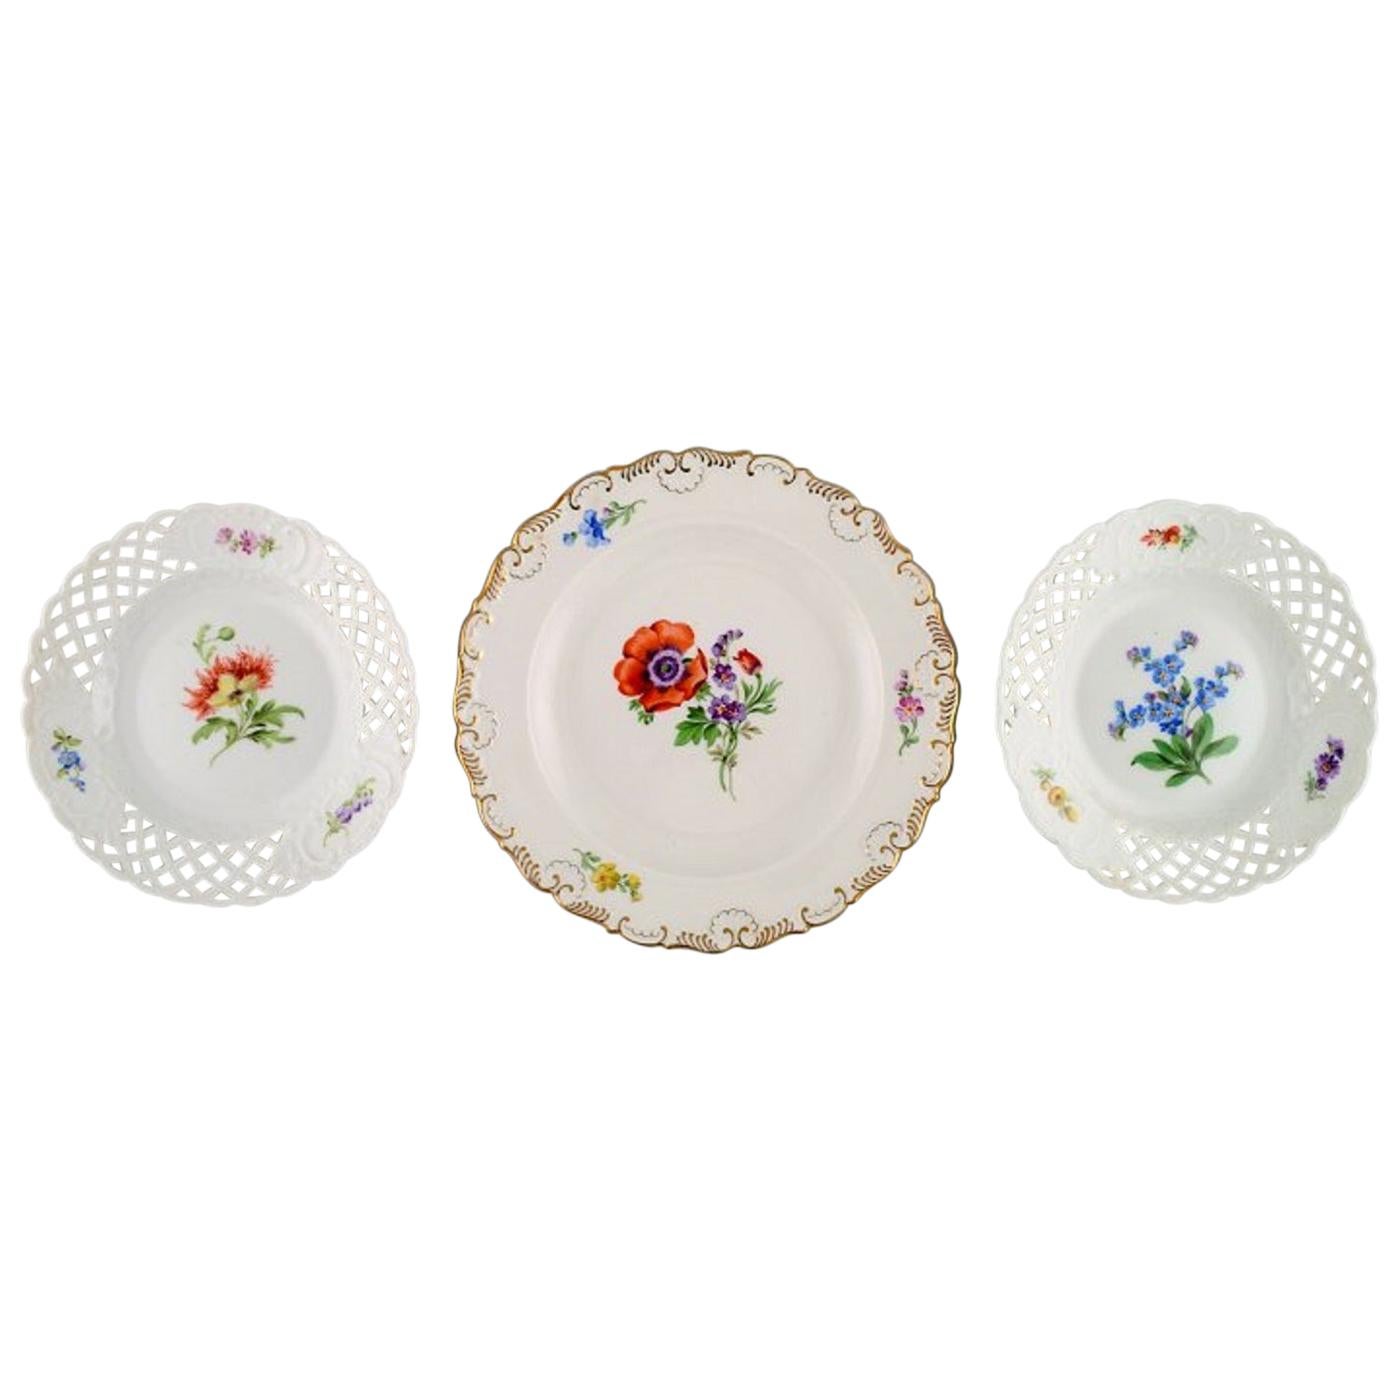 Three Antique Meissen Plates in Hand-Painted Porcelain with Floral Motifs